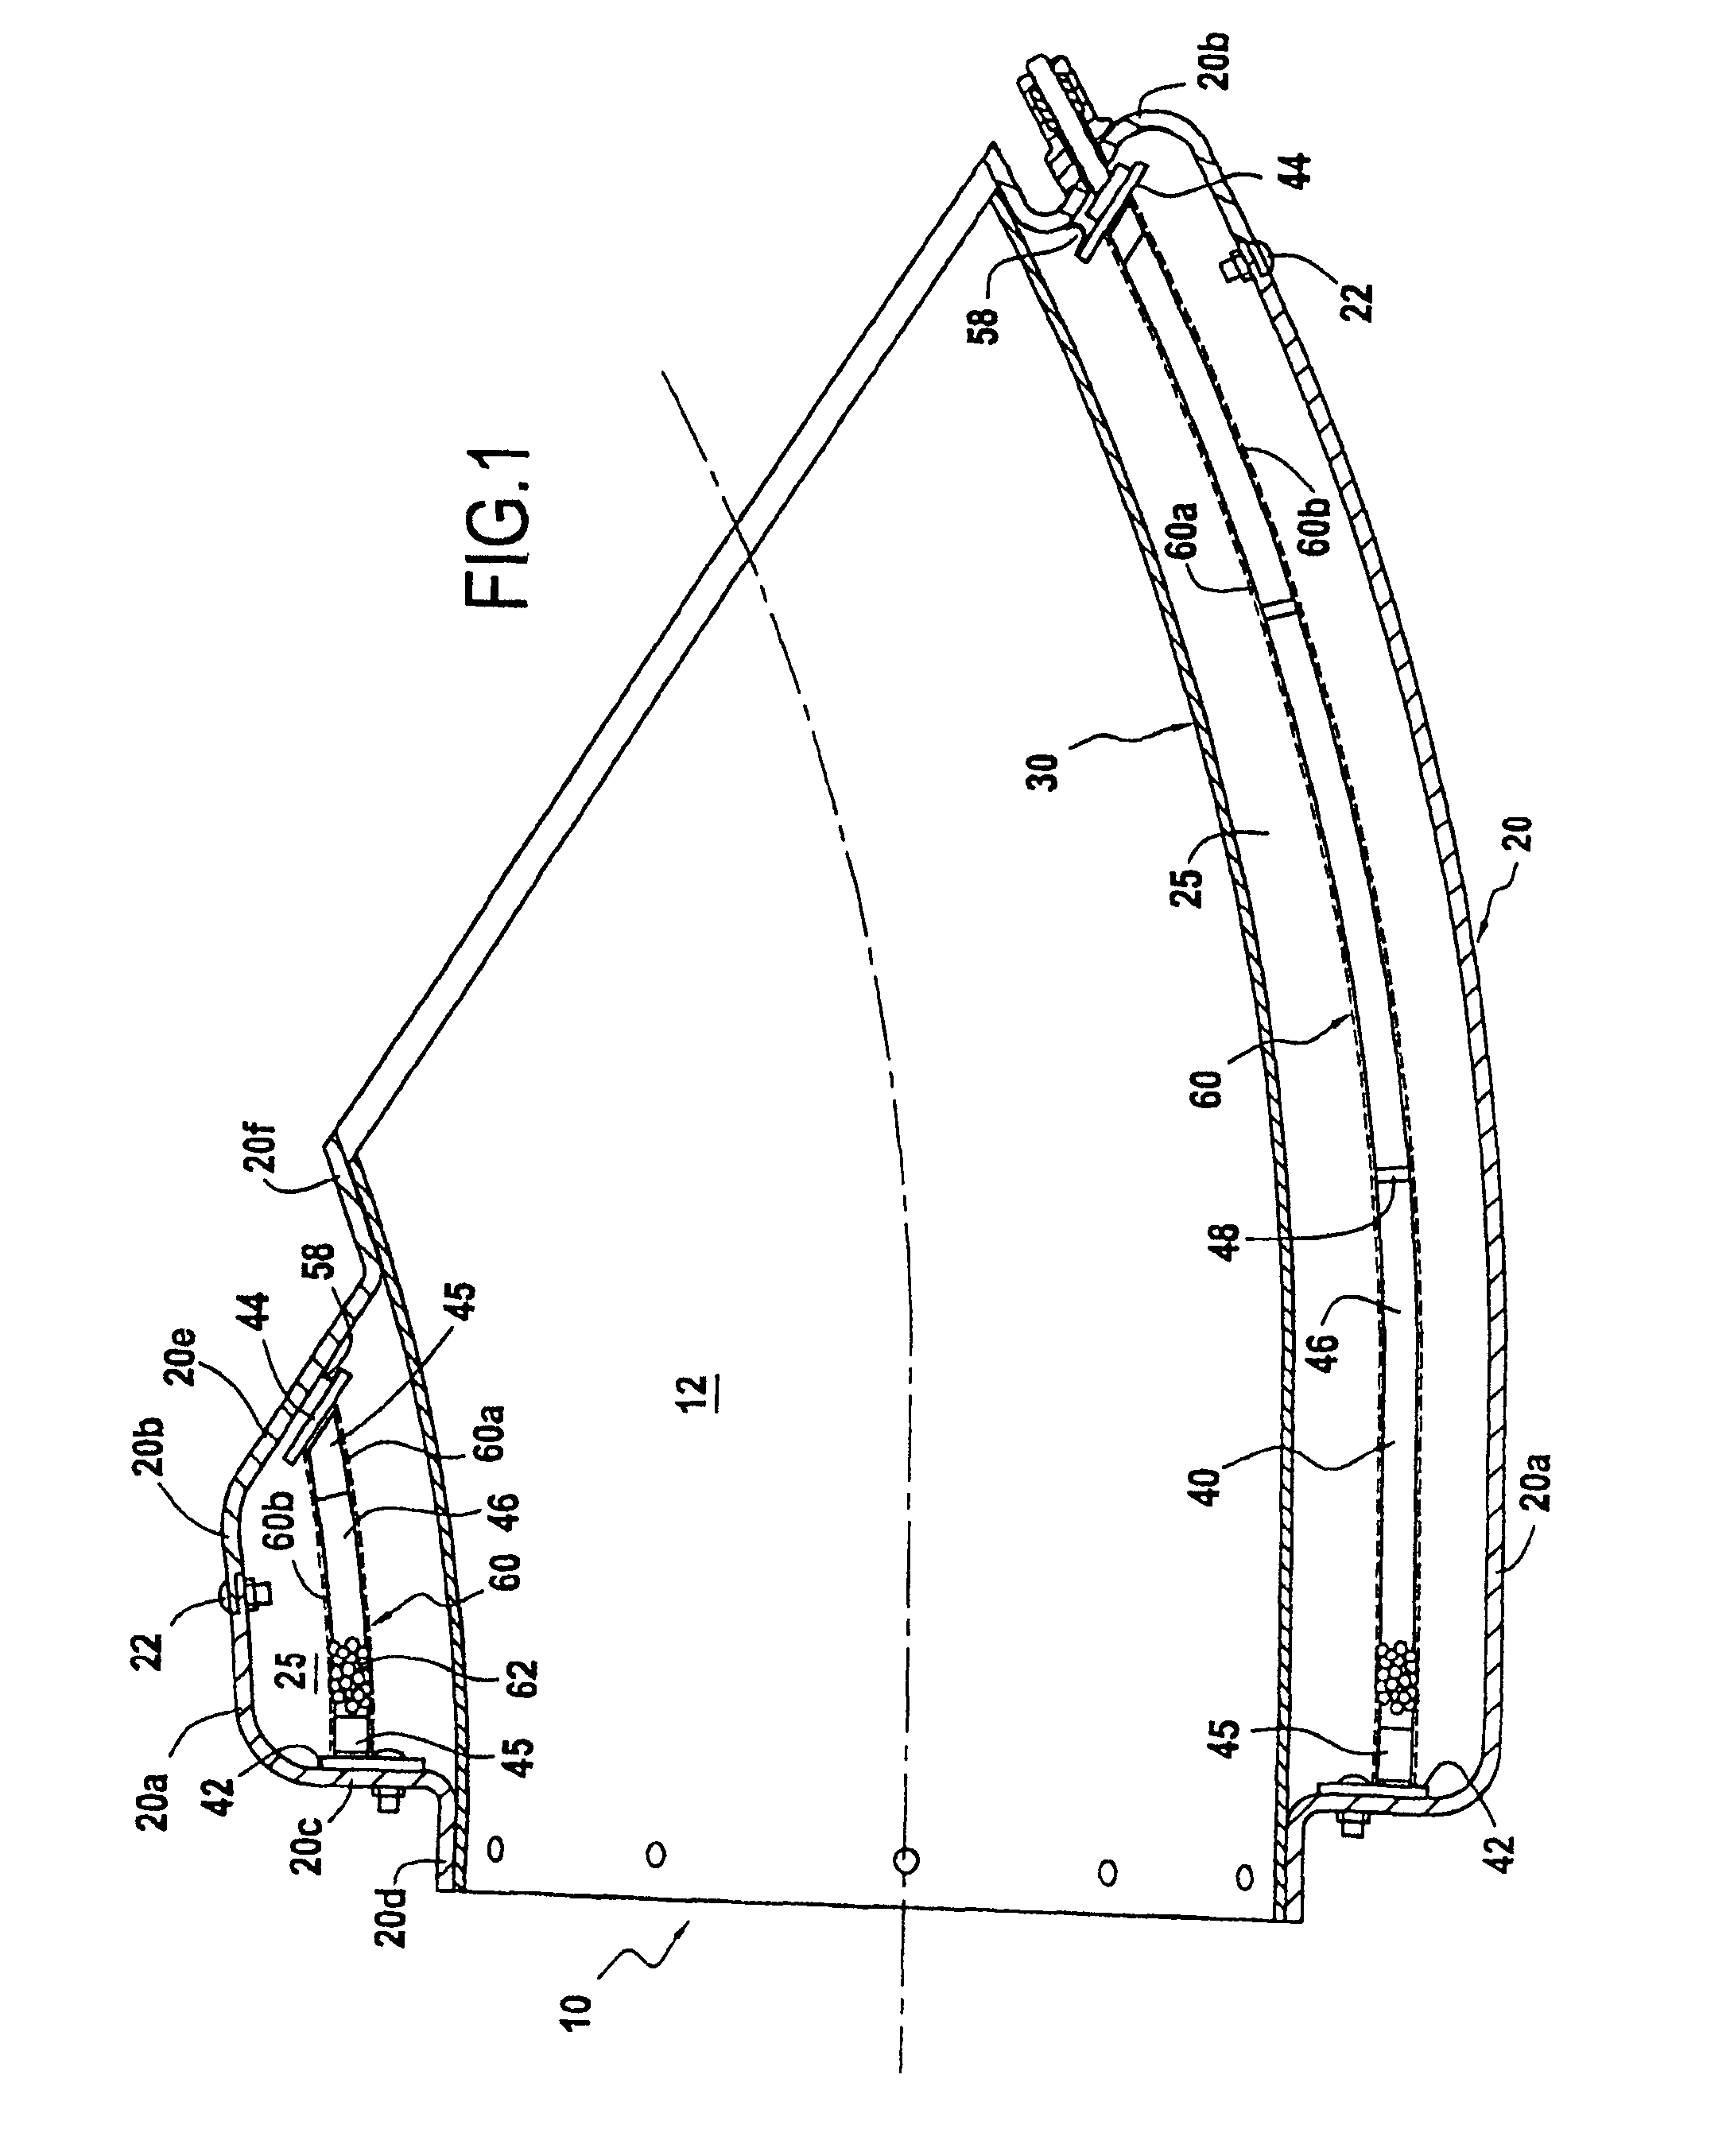 Soundproof exhaust pipe for a turbine engine